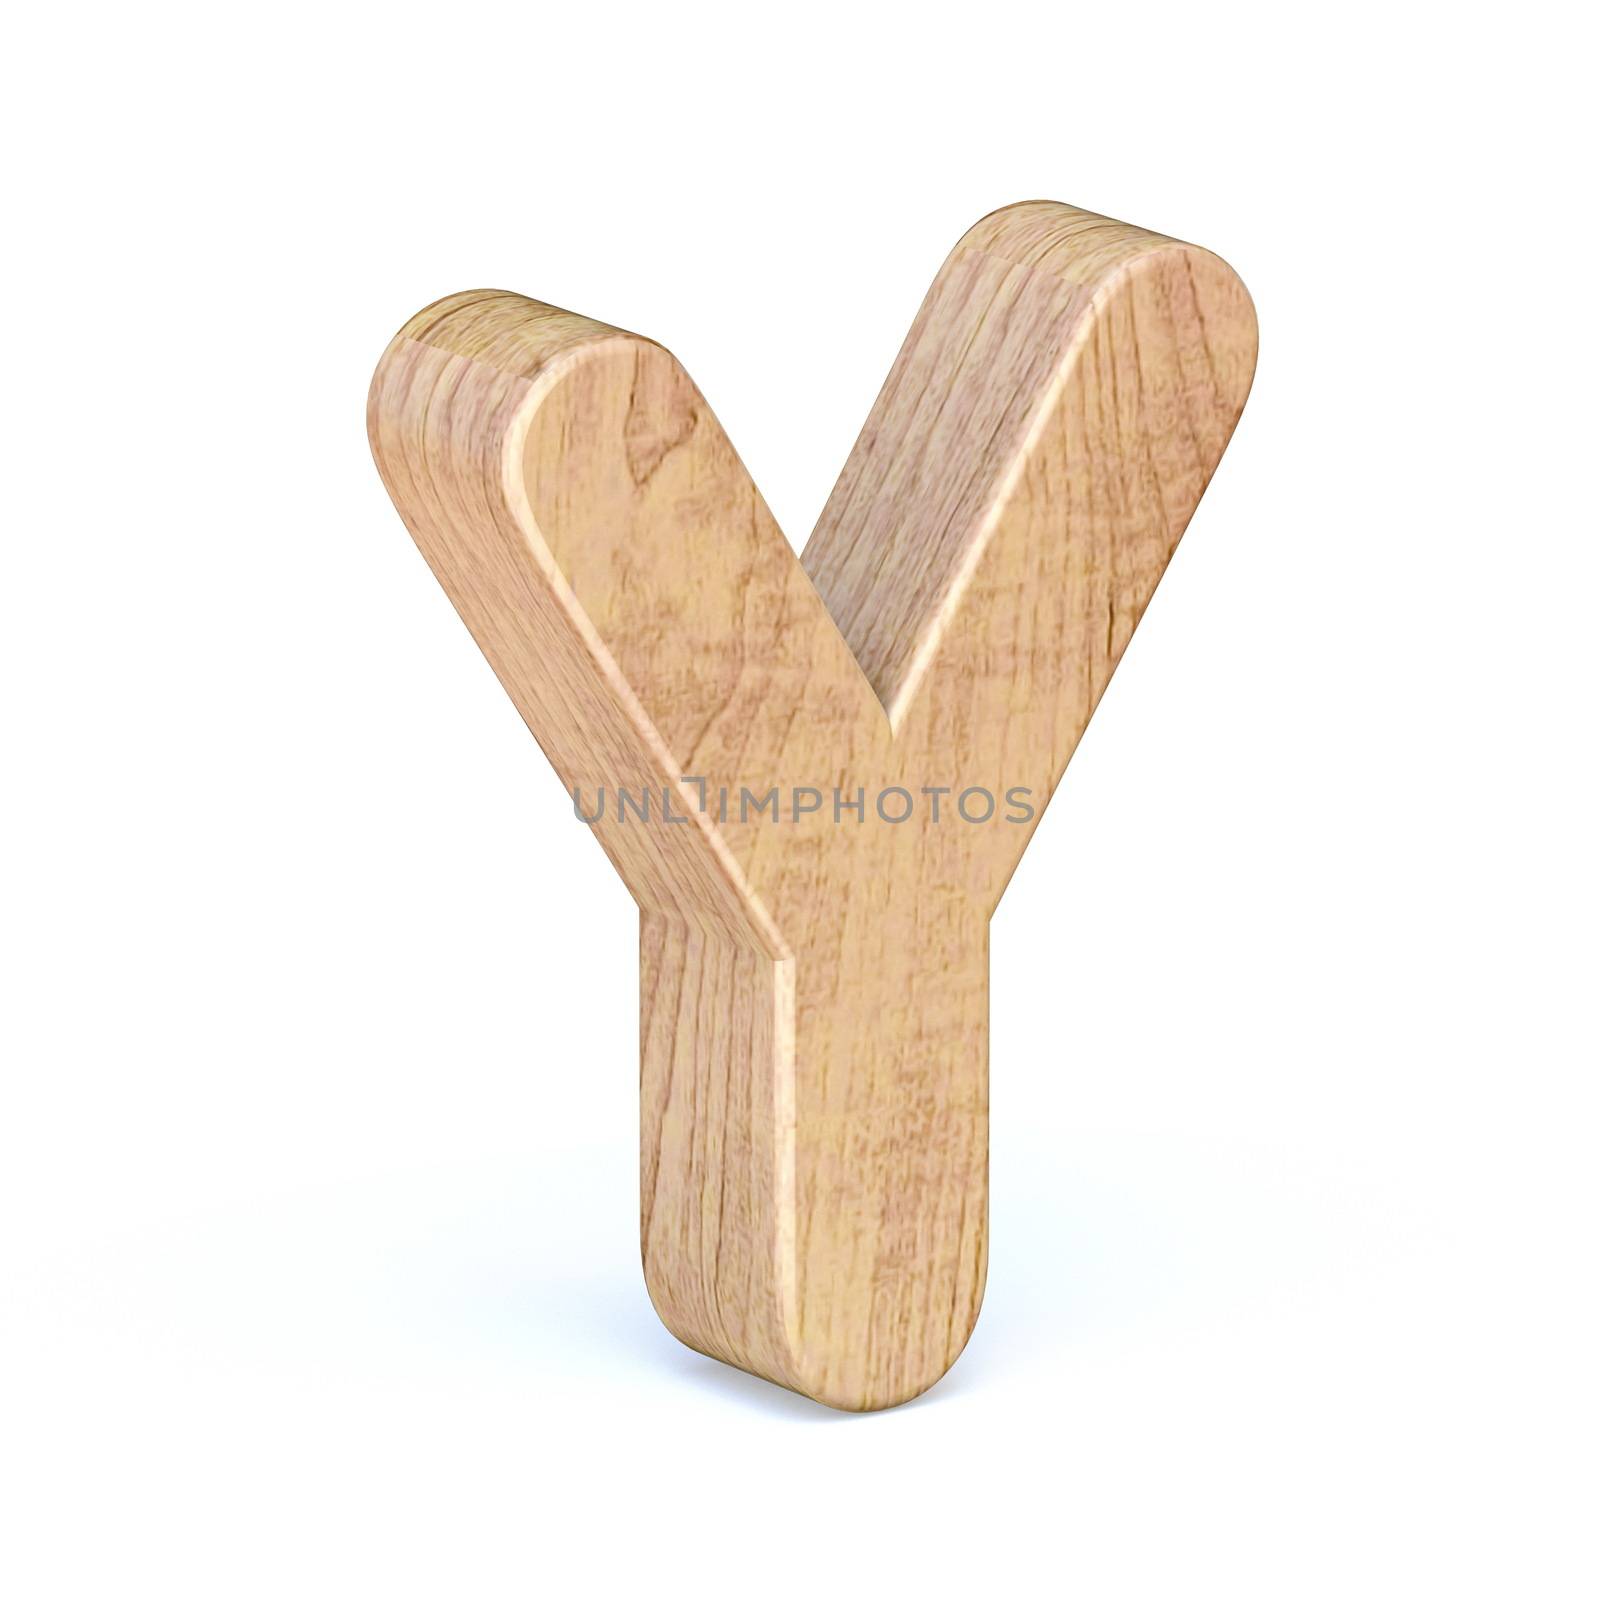 Rounded wooden font Letter Y 3D render illustration isolated on white background